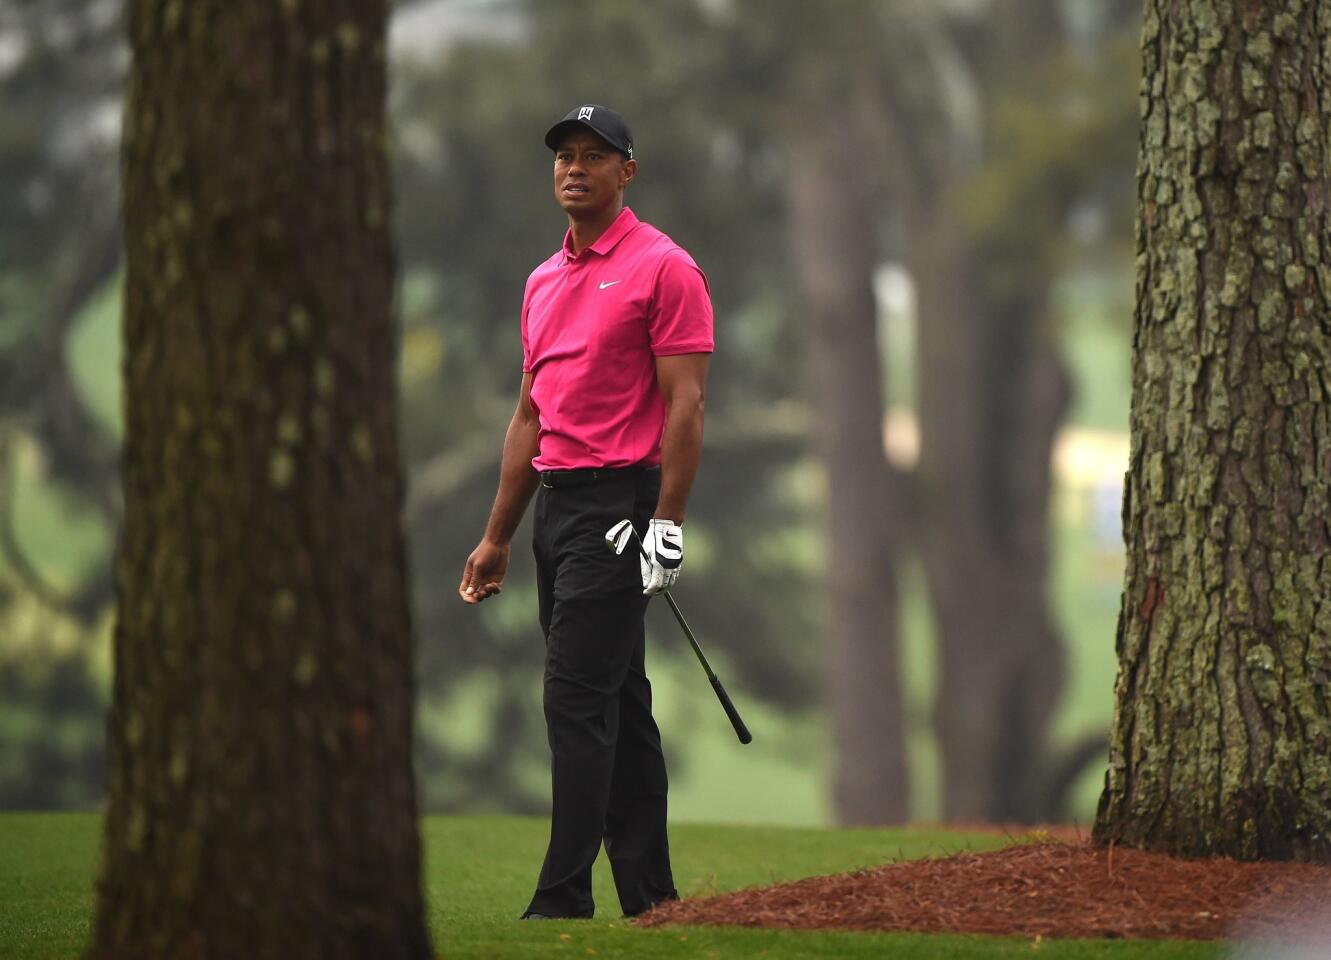 Tiger Woods at the Masters